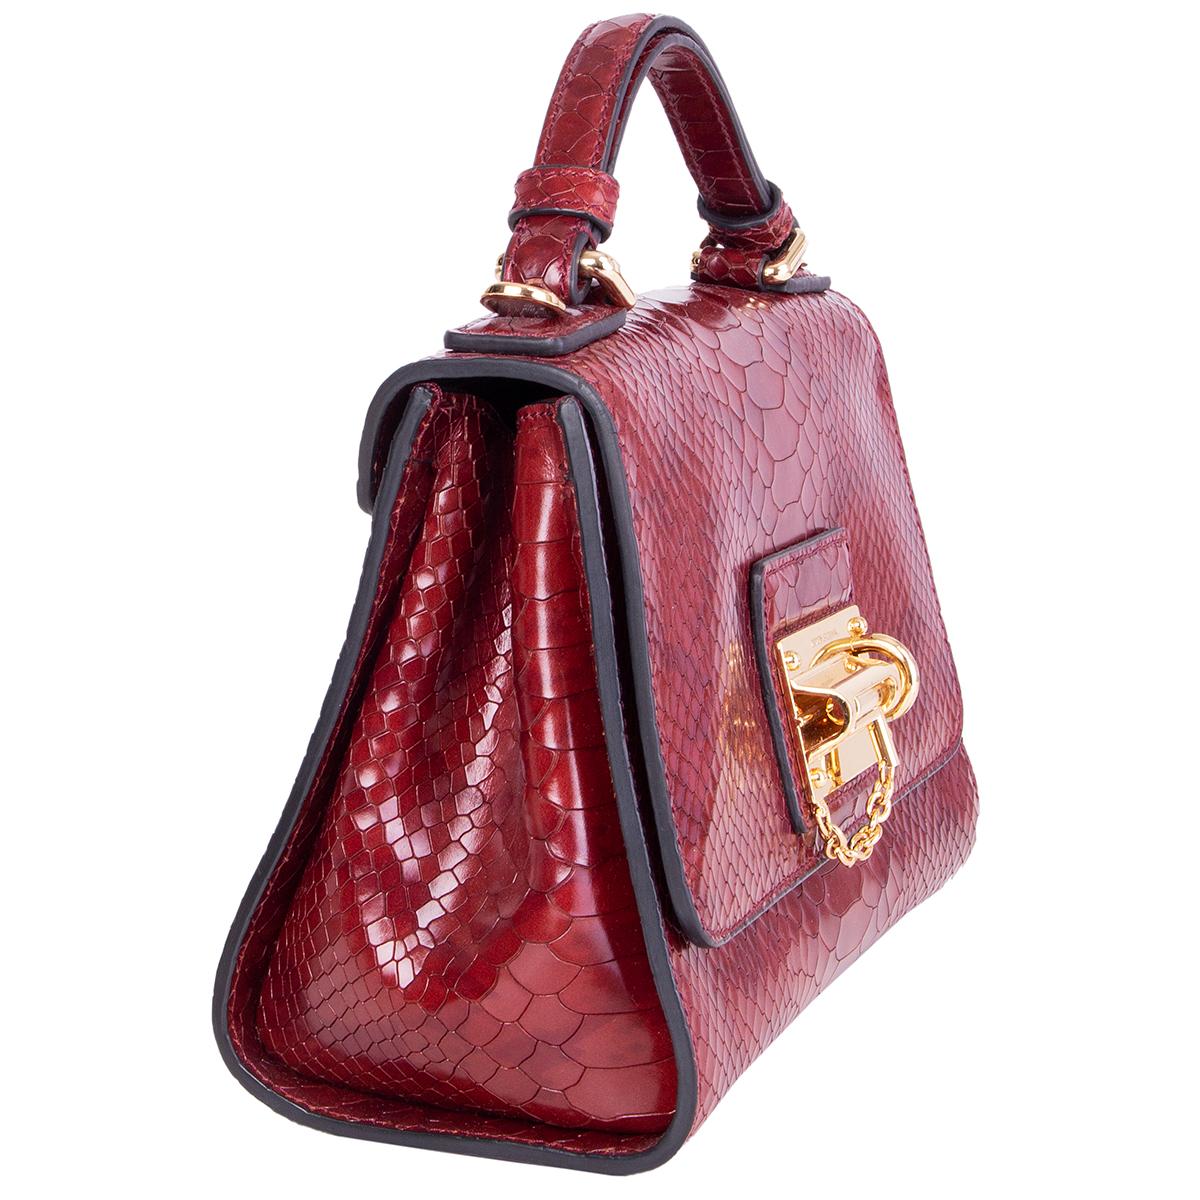 Dolce & Gabbana Monica Small shoulder bag in burgundy python embossed calfskin. Opens with a flap lock closure that is adorned with a gold-tone bar latch-lock. Lined in burgundy calfskin and leopard print canvas with one open pocket against the